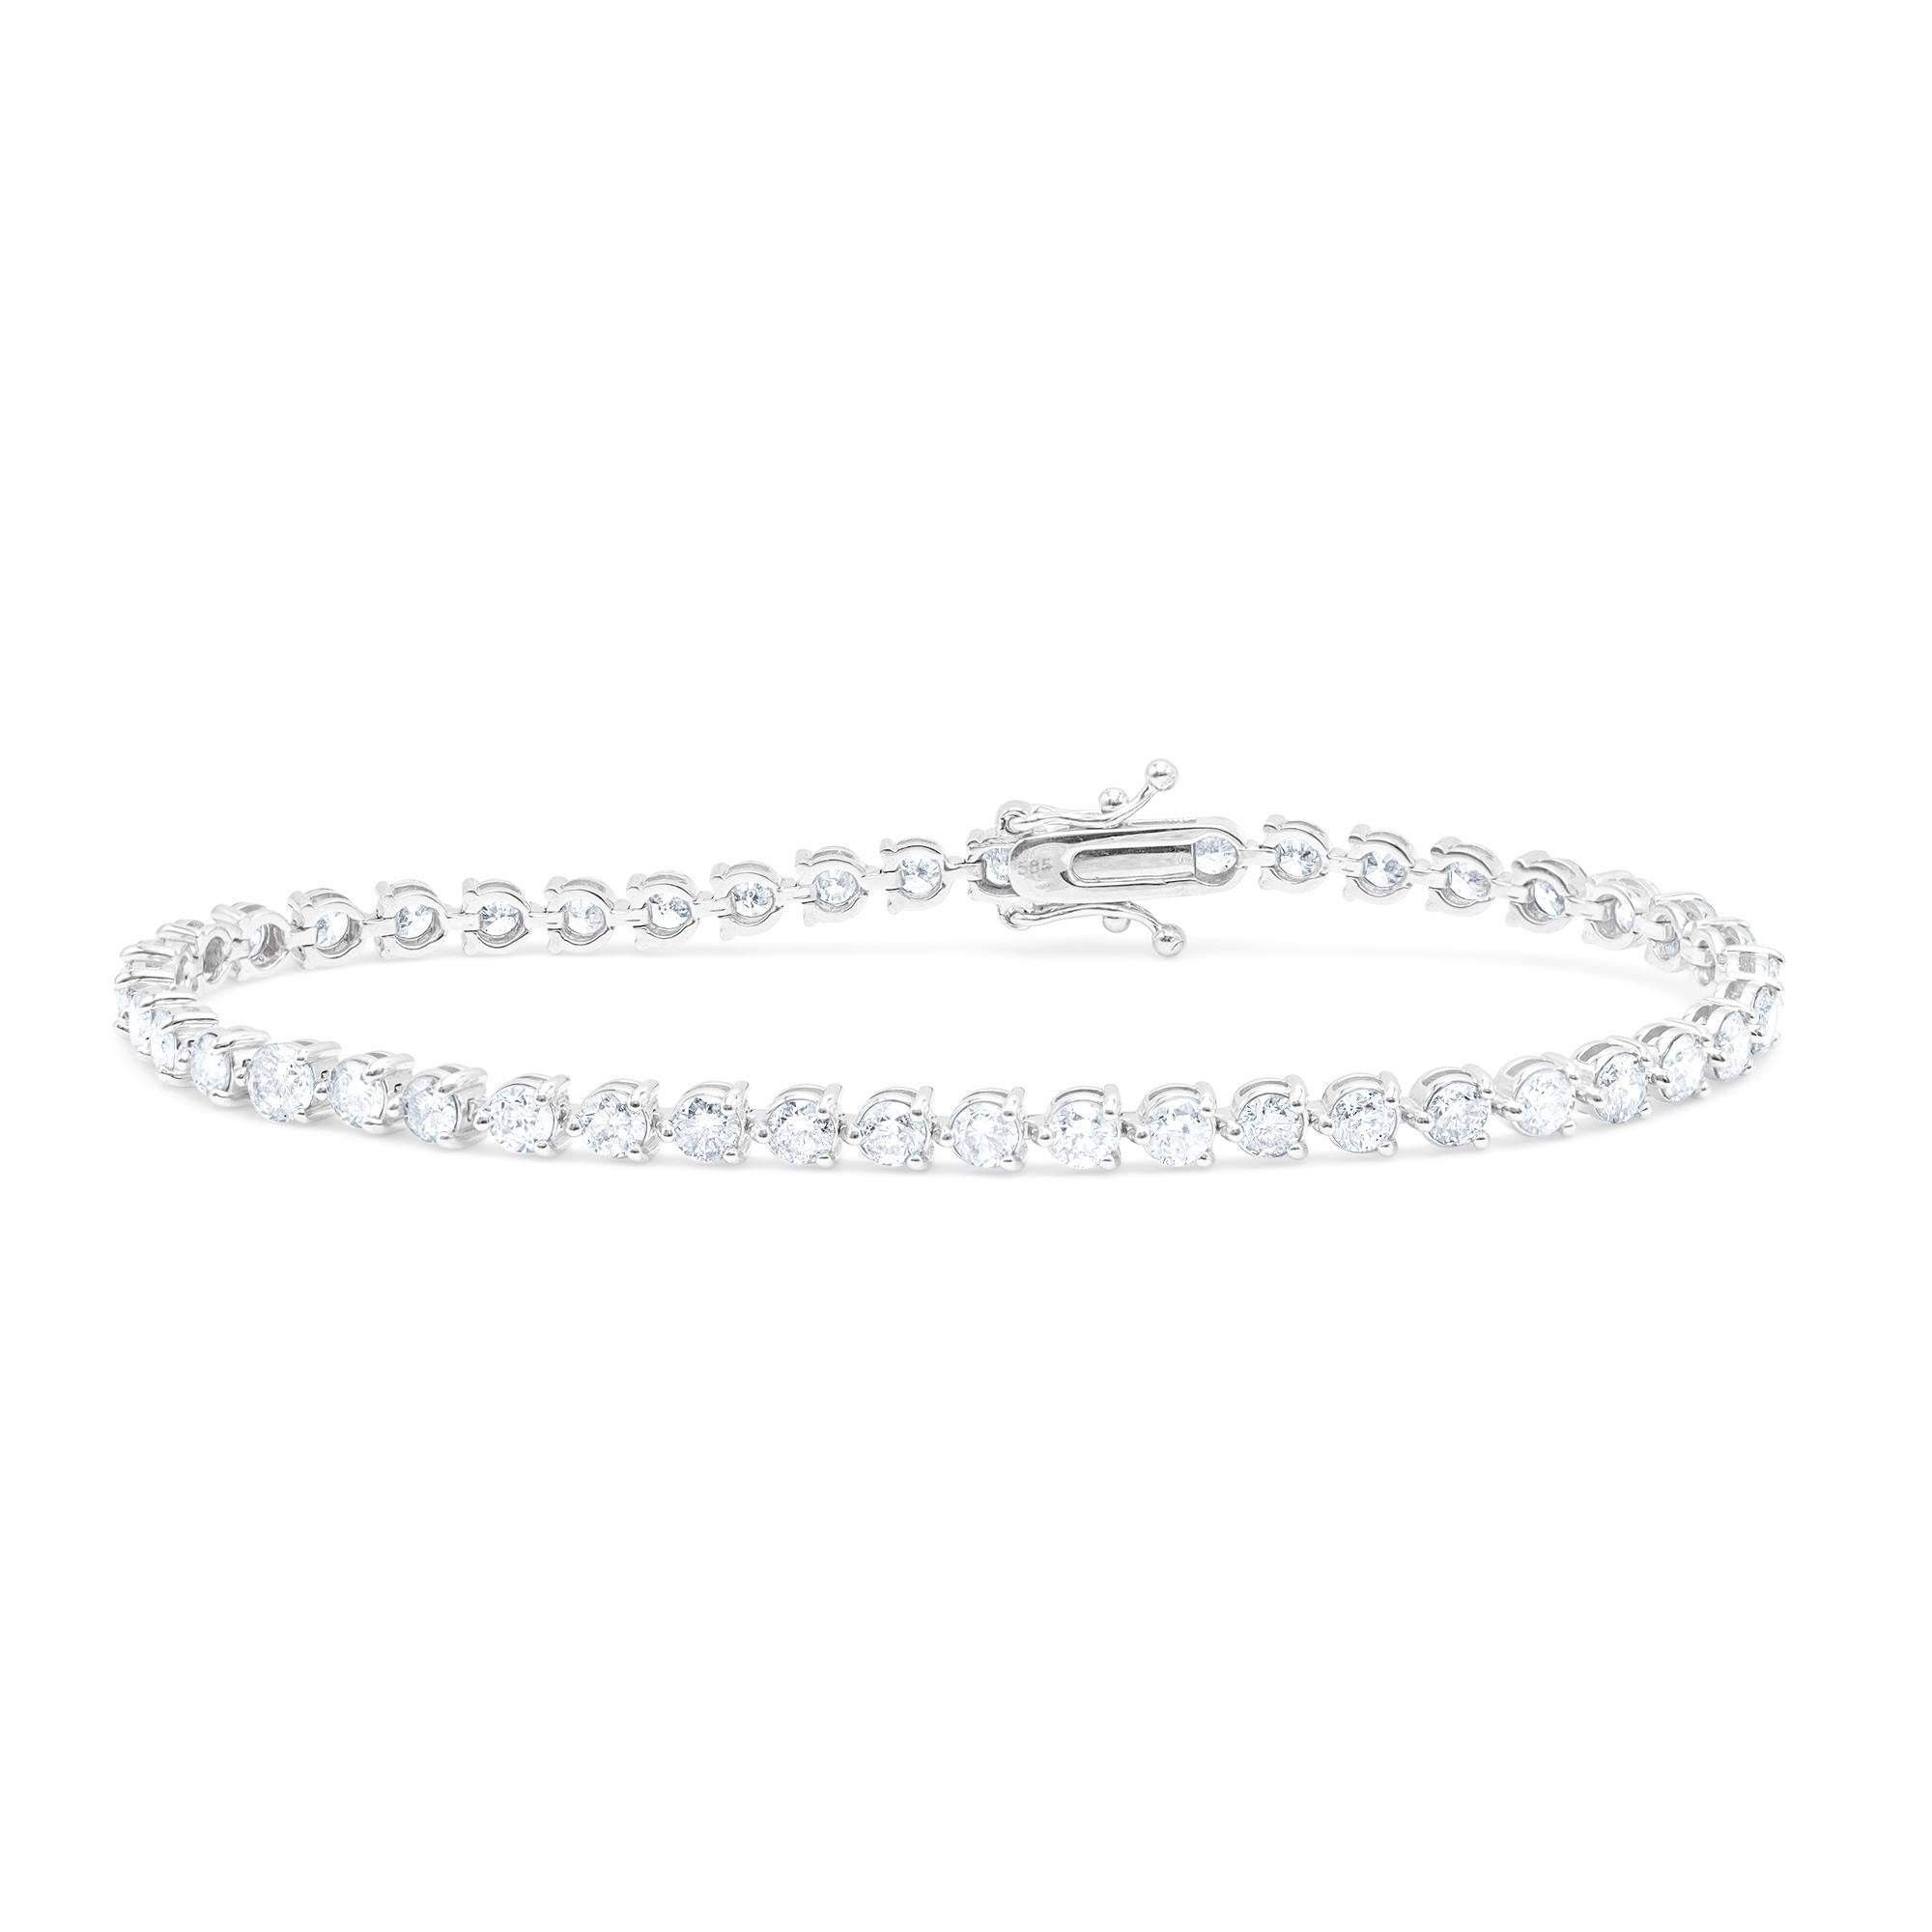 Custom 14kt white gold diamond tennis bracelet 4.50 cts of round diamonds in a 3 prong buttercup setting 44 stones  0.06 each GH color SI clarity.  Excellent Cut.
